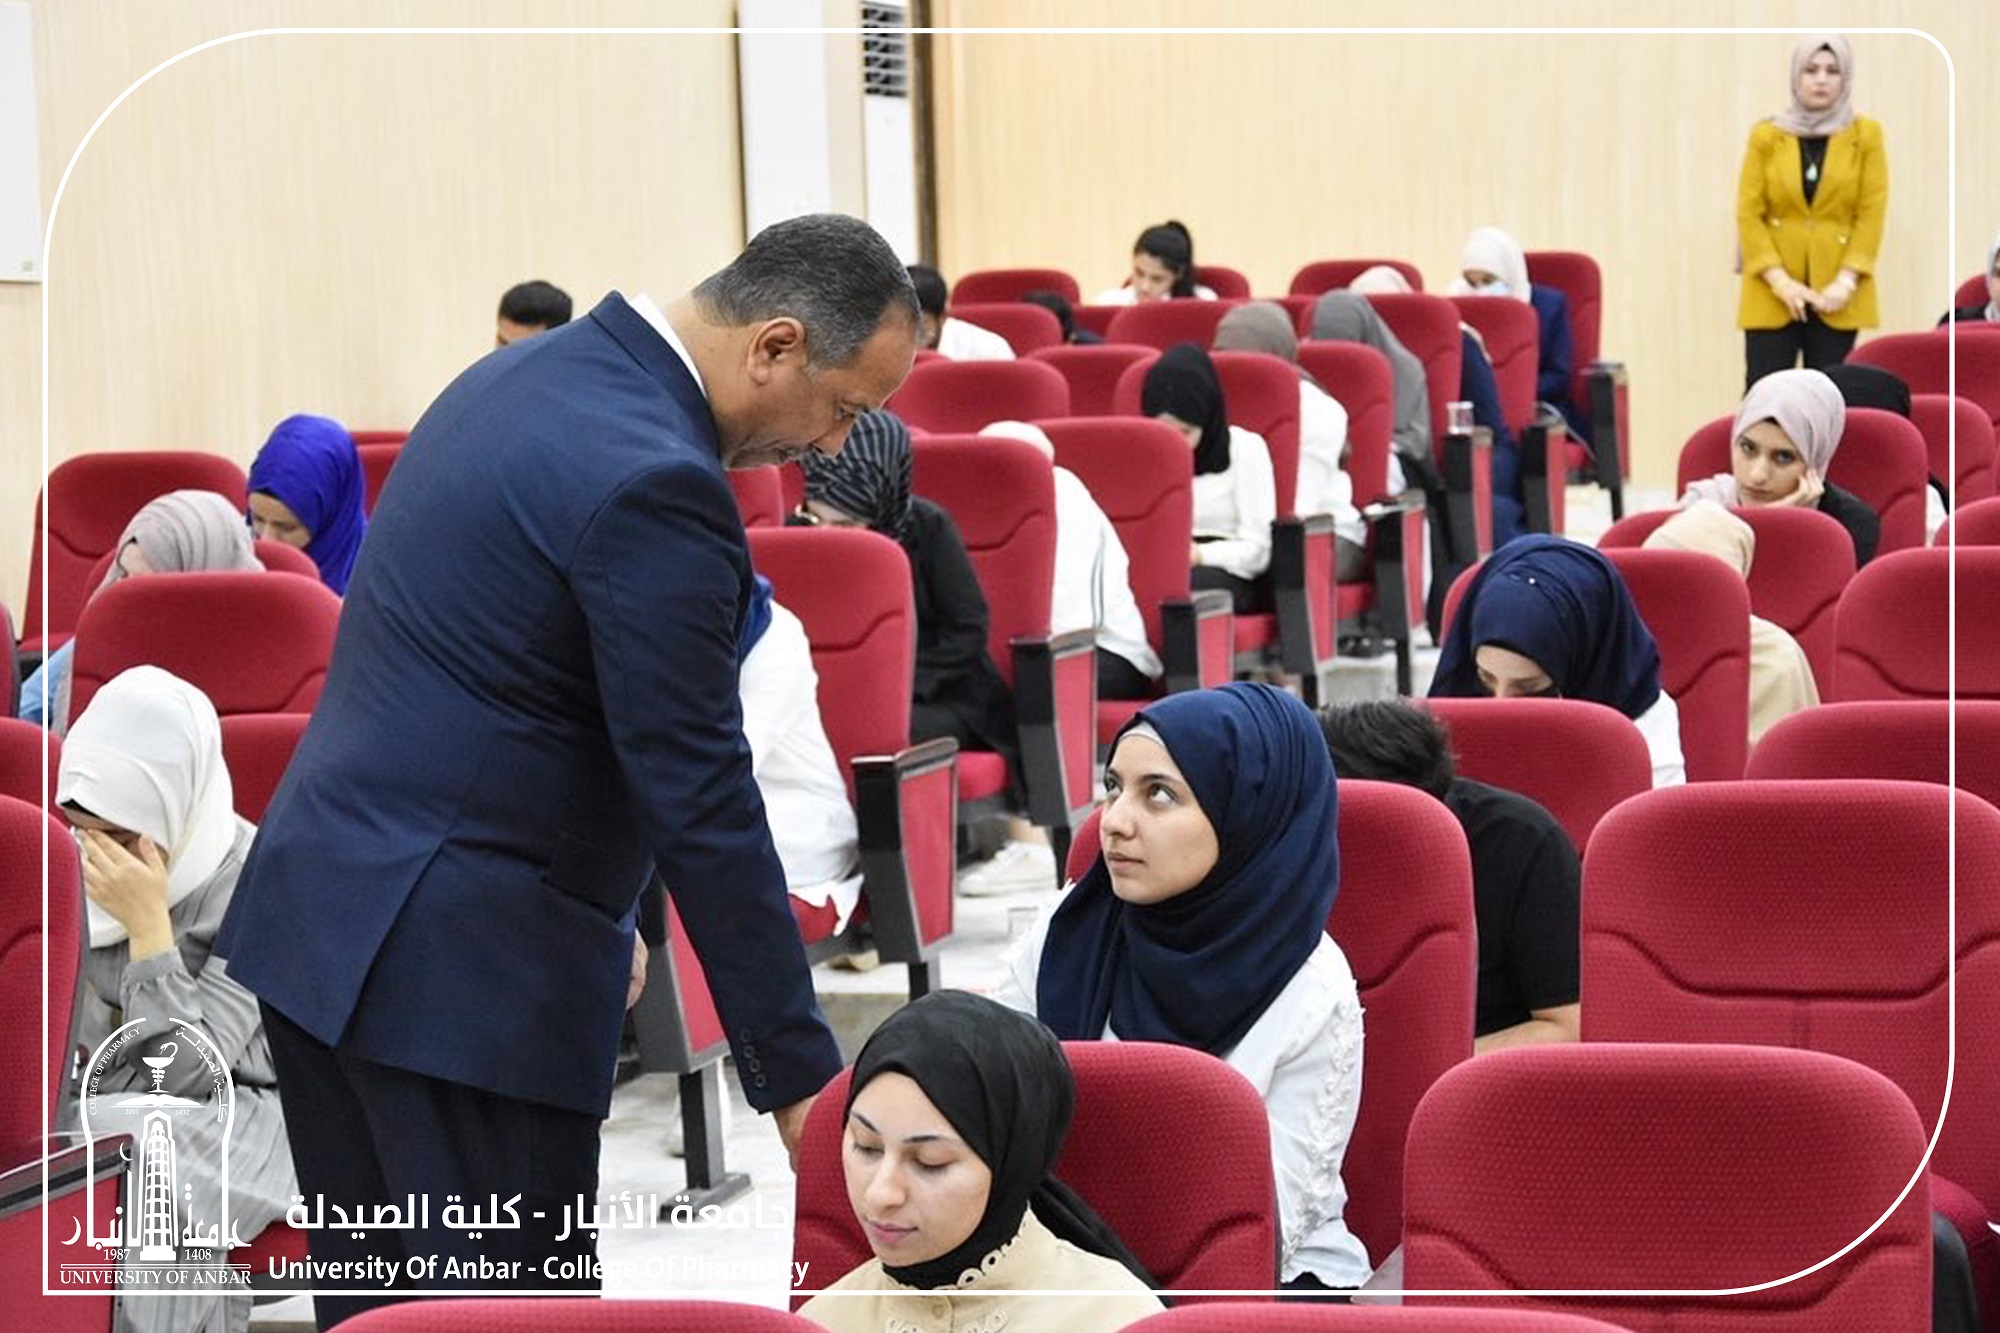 The President of the University inspects the progress of the final exams in the Faculty of Pharmacy